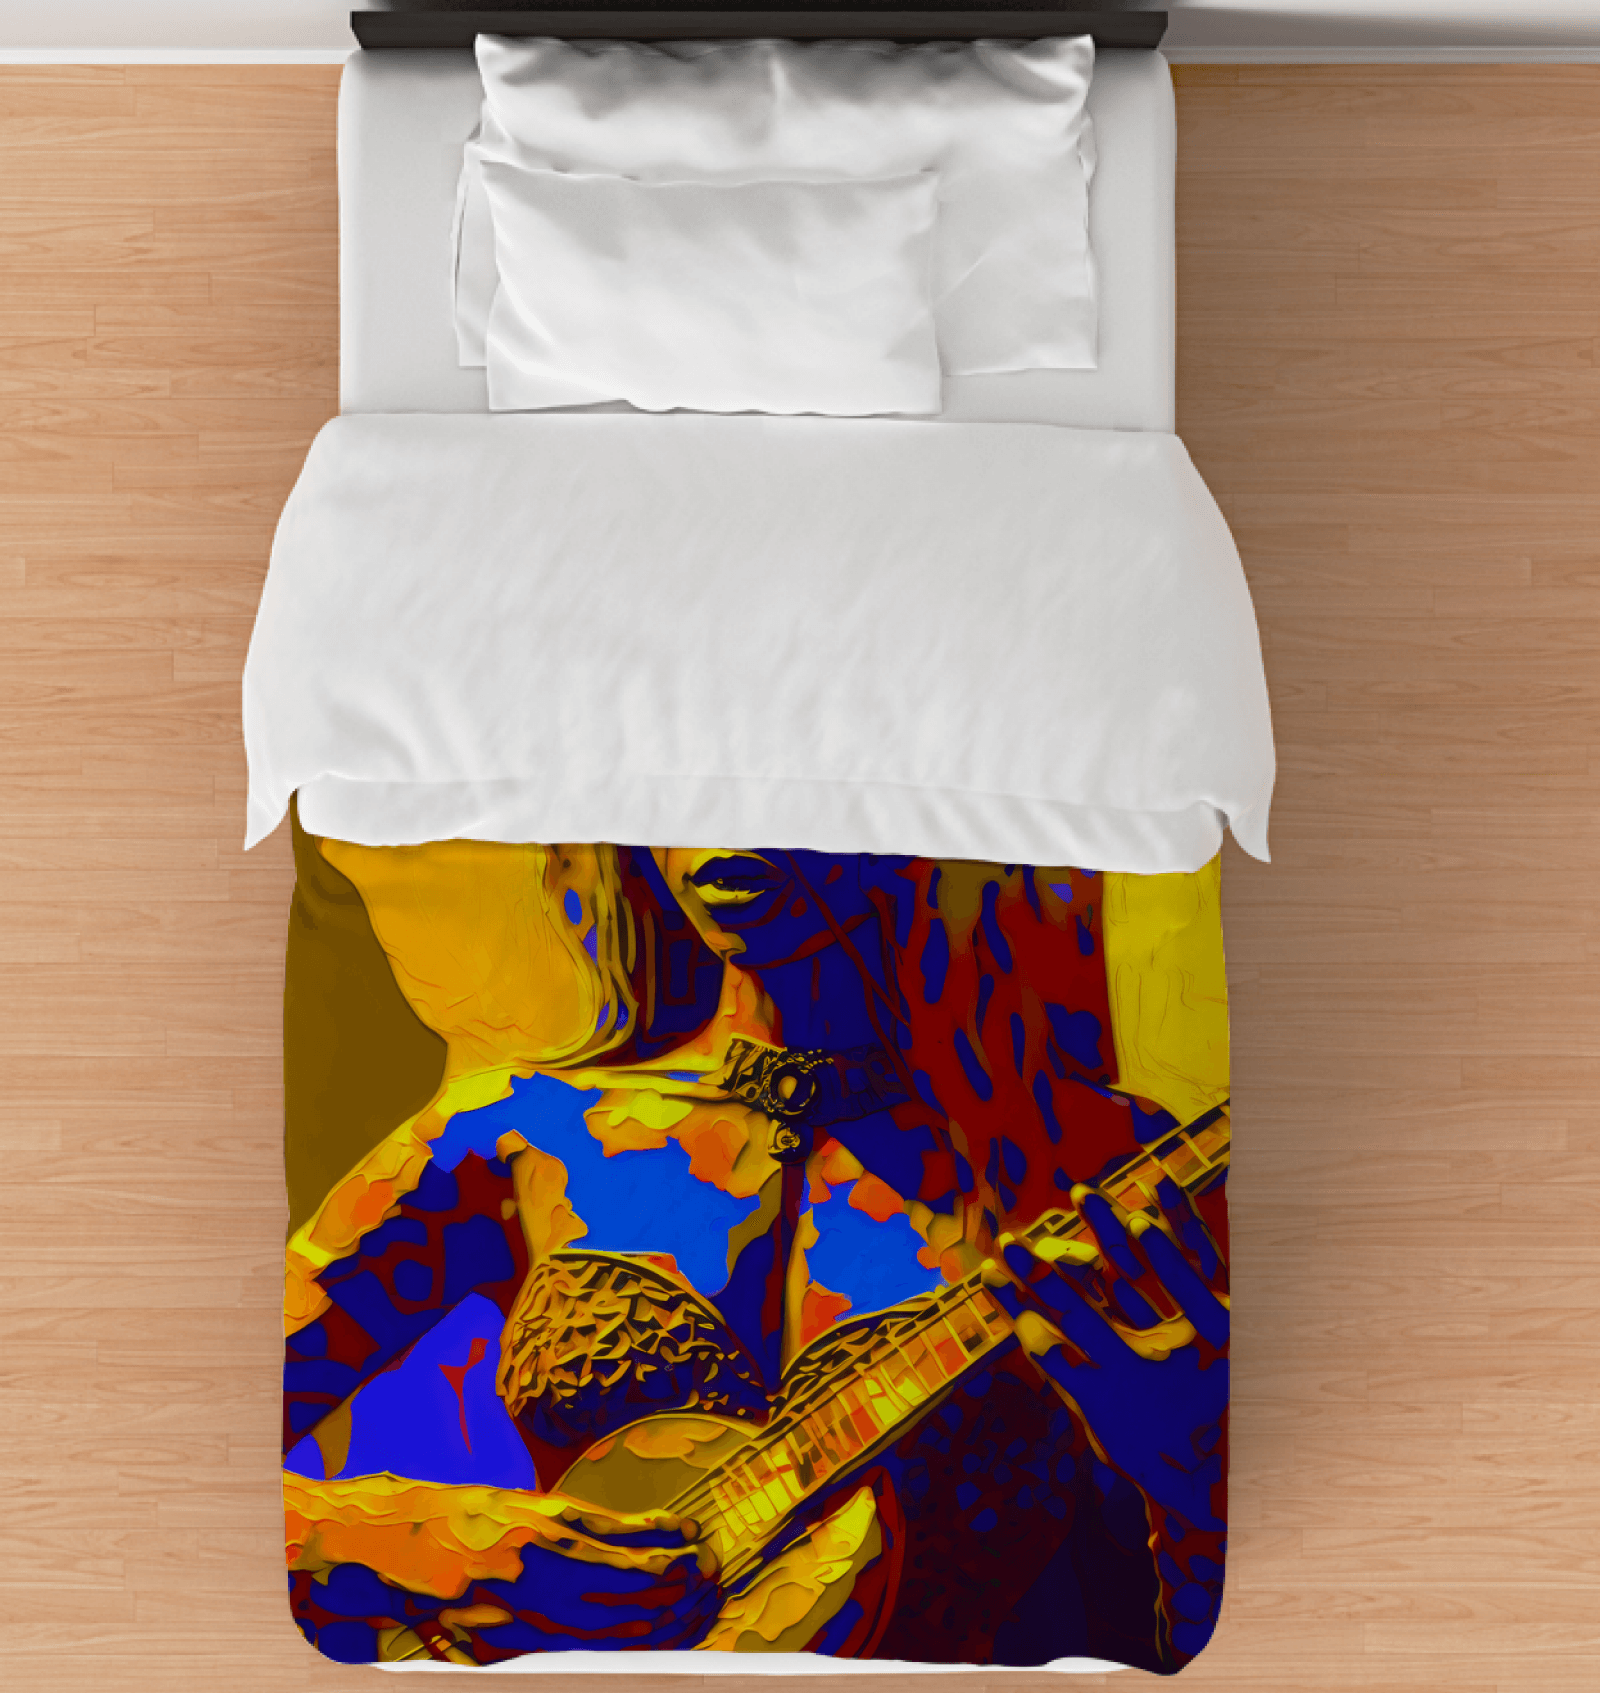 Modern NS 1006 Duvet Cover for a chic bedroom update